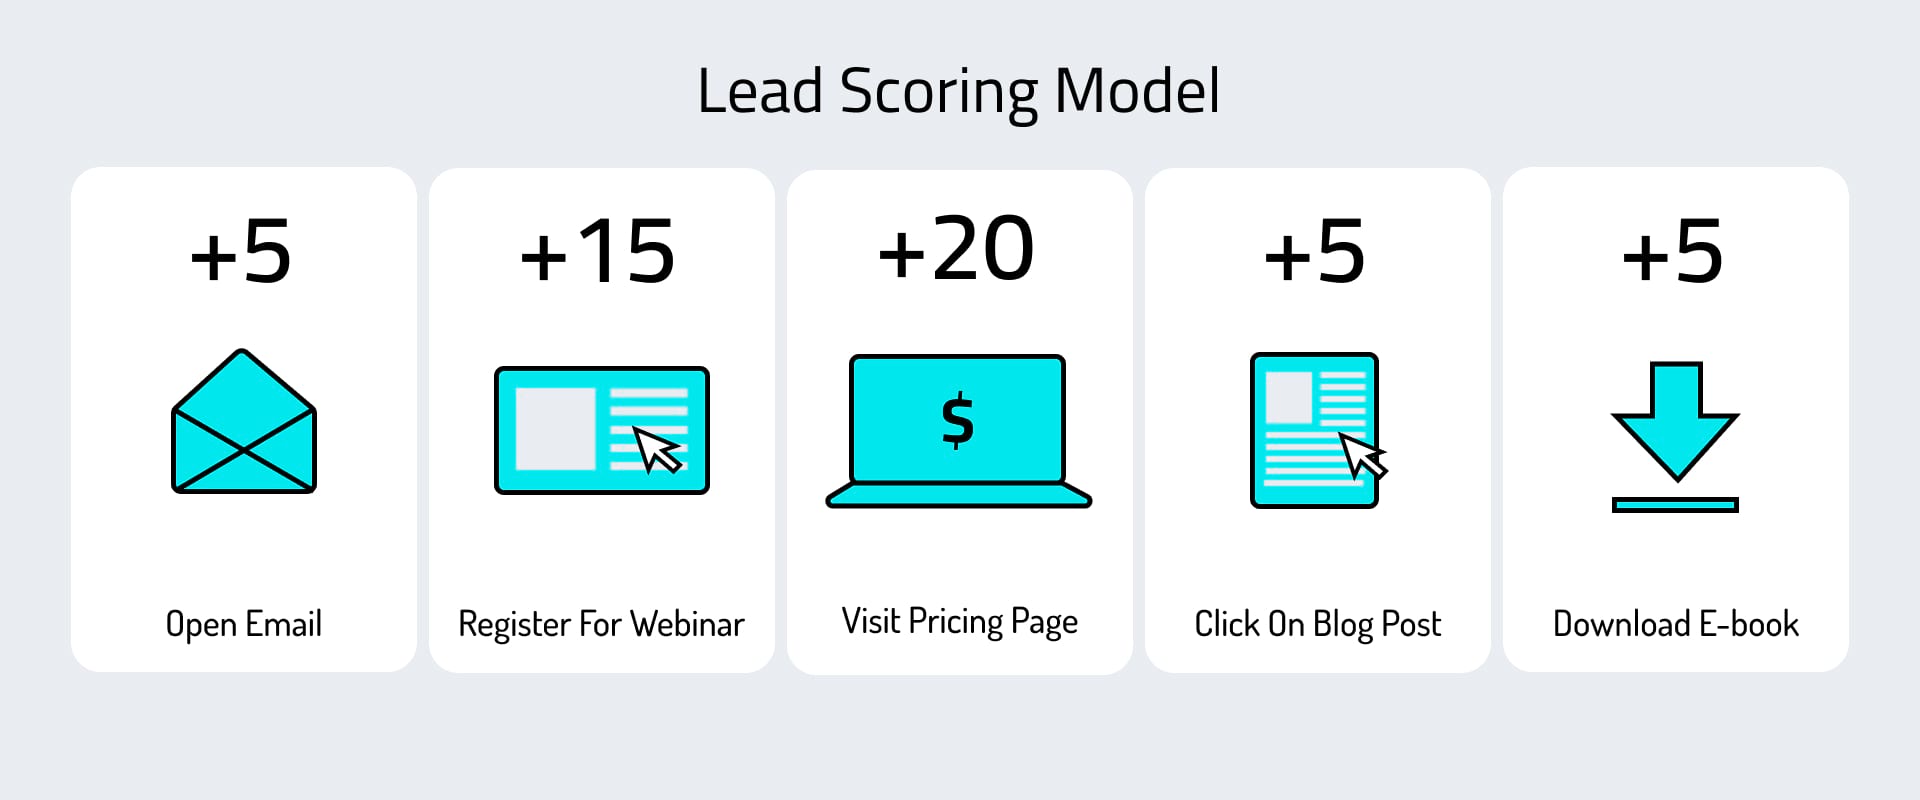  An illustration of a lead scoring model with five different stages 